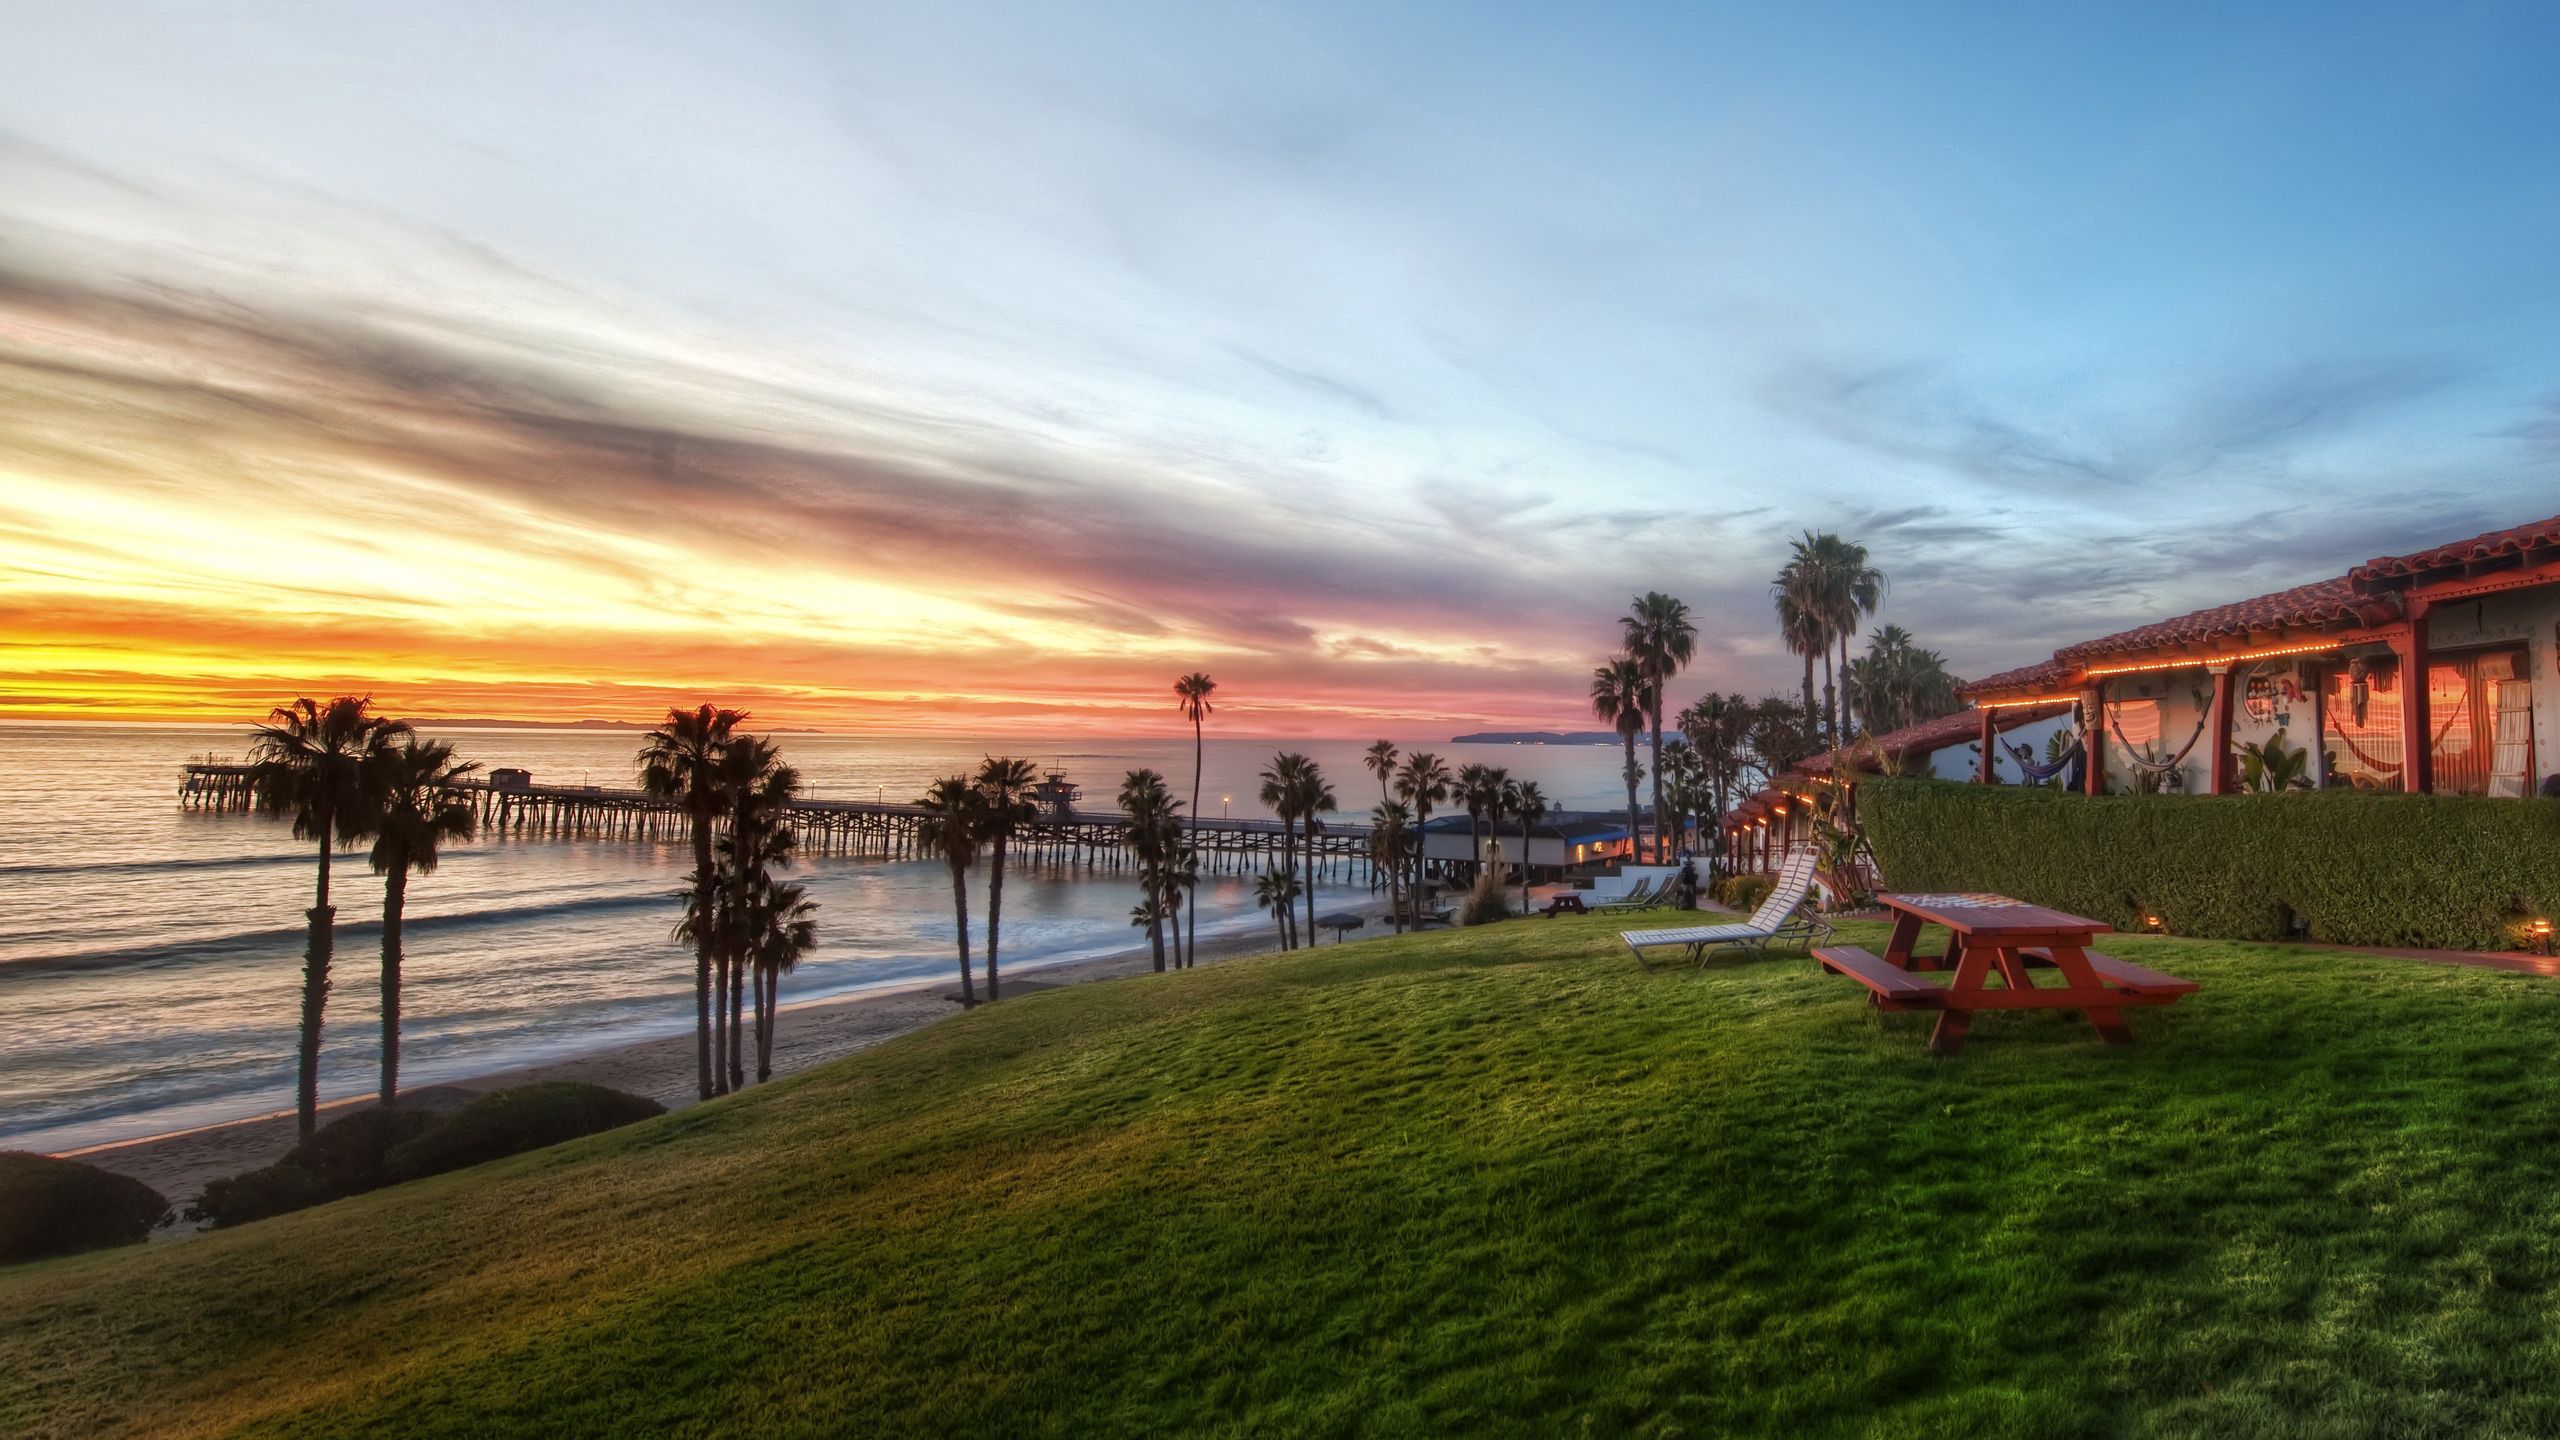 slope, benches, picnic, nature, sea, palms, bank, shore, evening, table download HD wallpaper